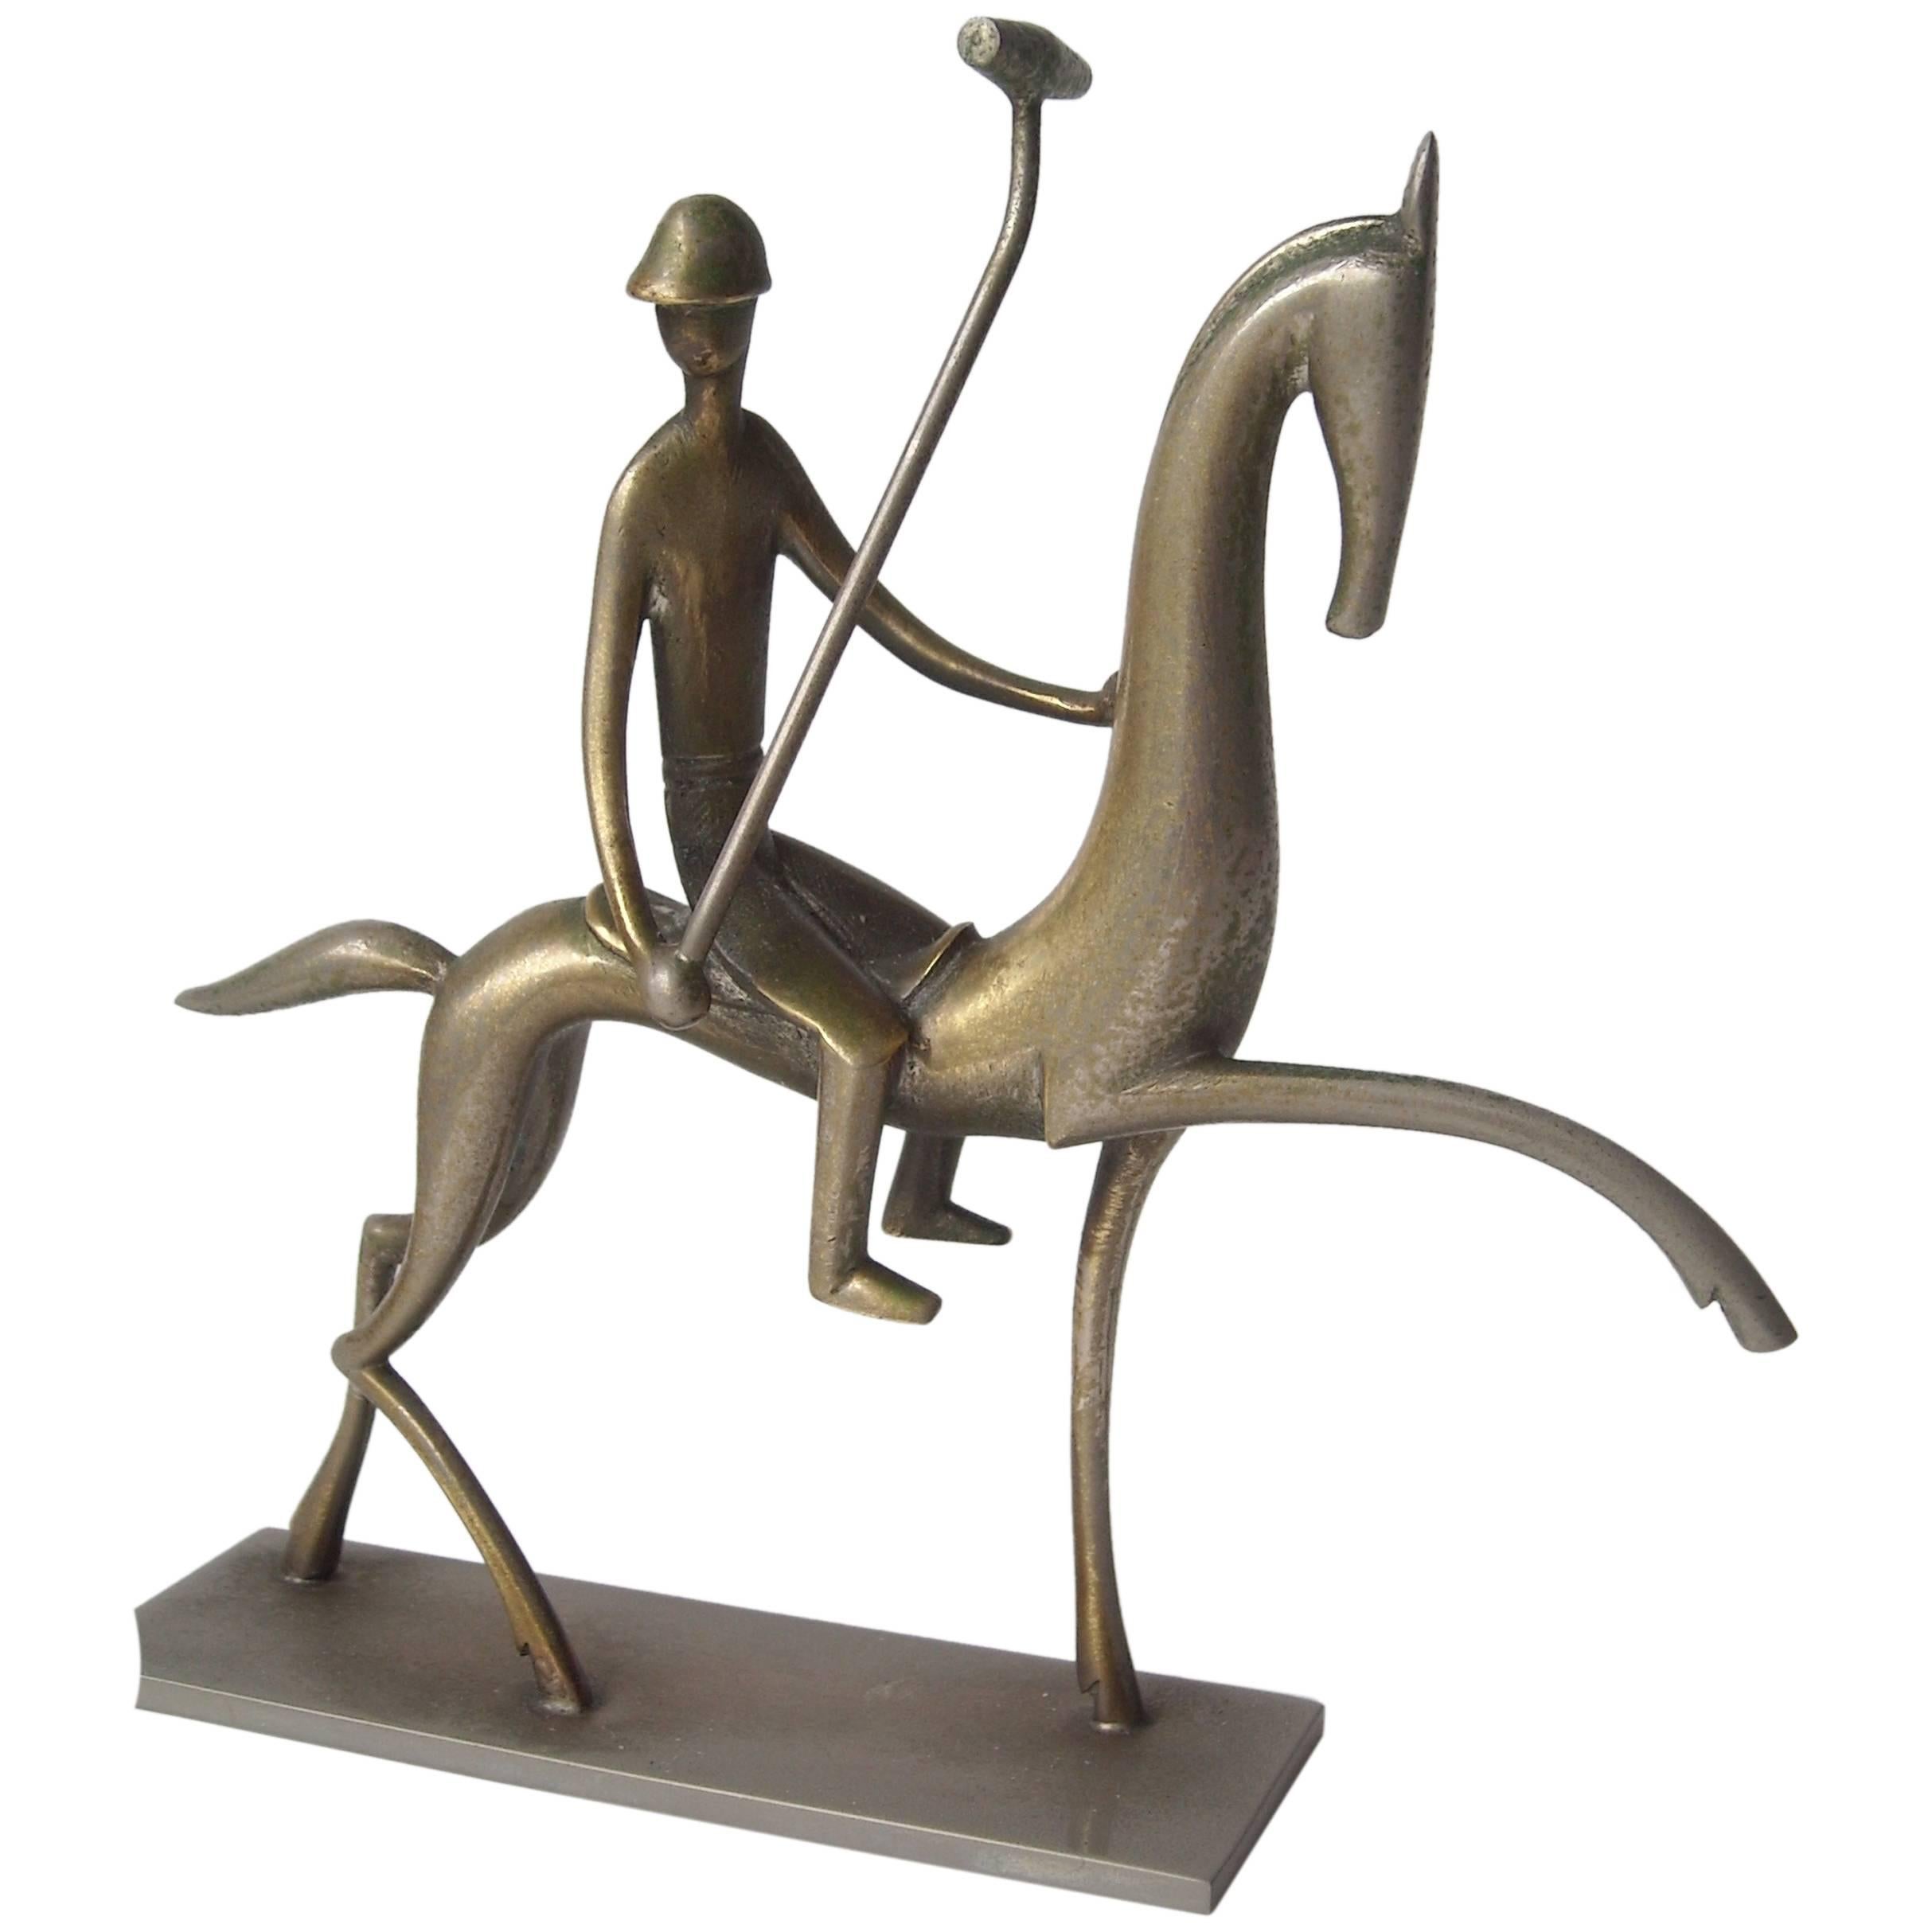 Hagenauer "Polo Player" Sculpture in Nickel-Plated Metal, Marked WHW